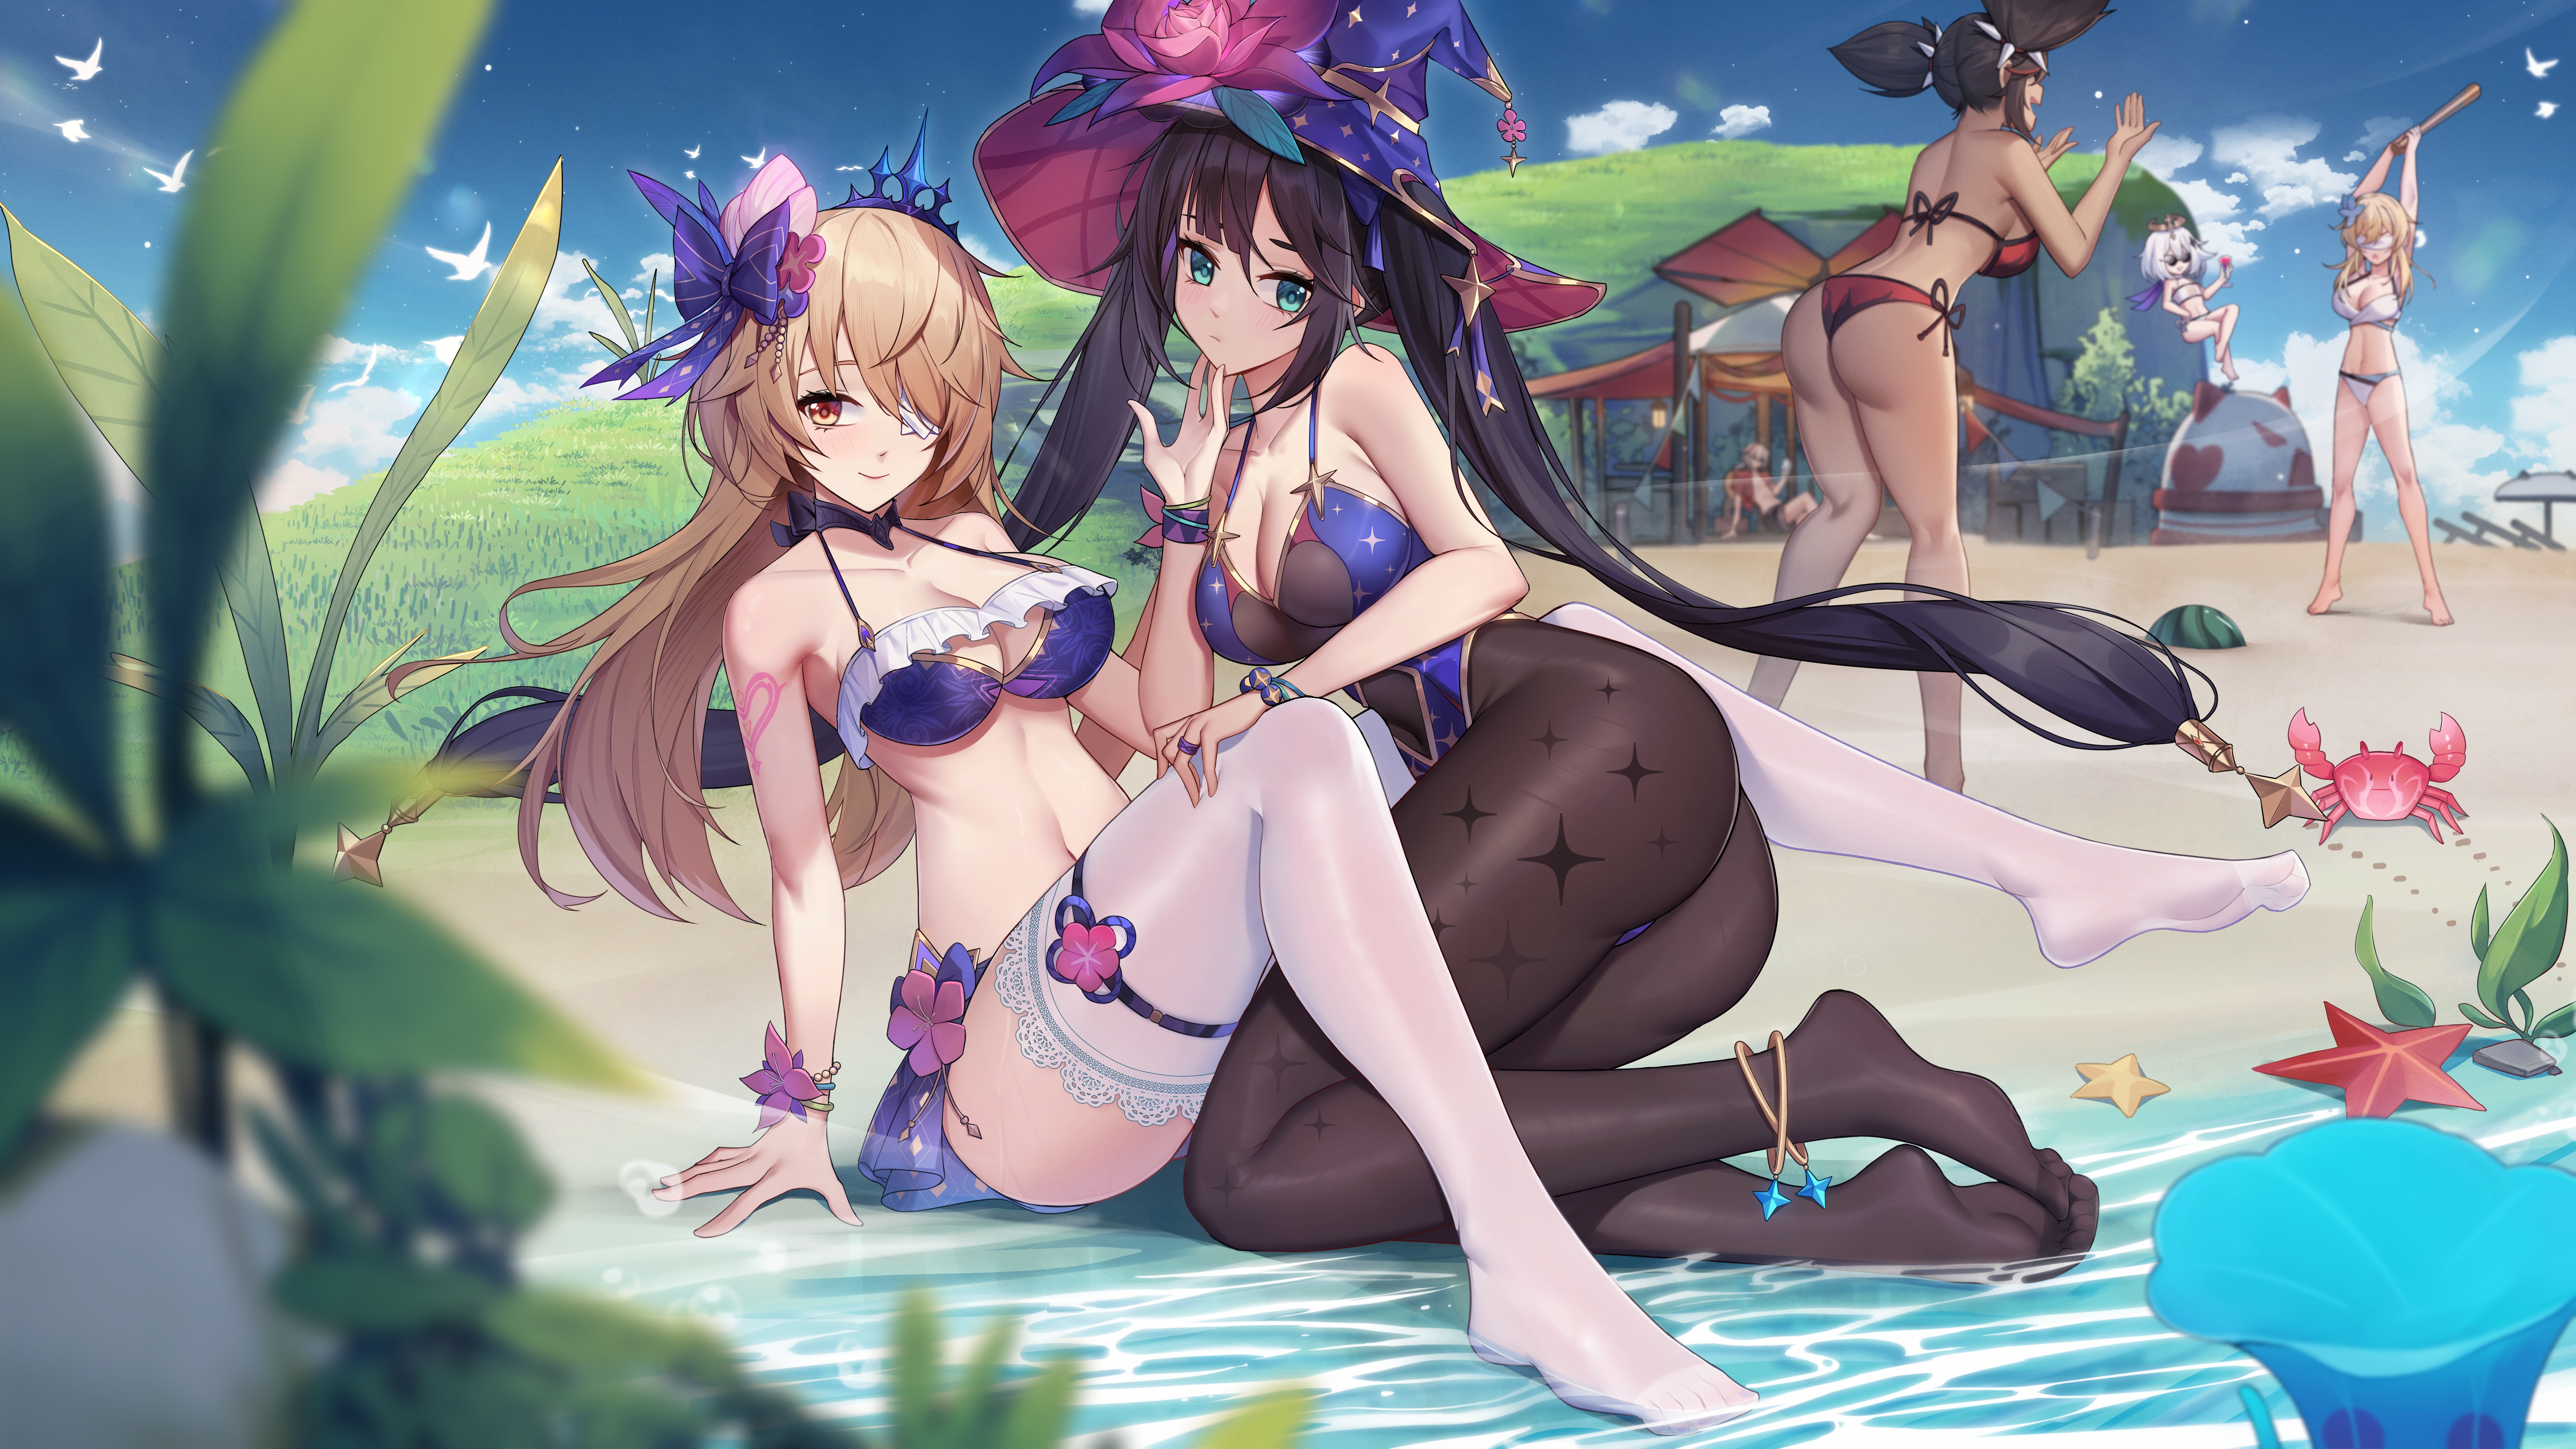 Anime 7111x4000 anime anime girls Fischl (Genshin Impact) Mona (Genshin Impact) Paimon (Genshin Impact) Lumine (Genshin Impact) Xinyan (Genshin Impact) bikini swimwear pantyhose big boobs ass water starfish crabs watermelons hat witch hat group of women women outdoors women on beach Genshin Impact